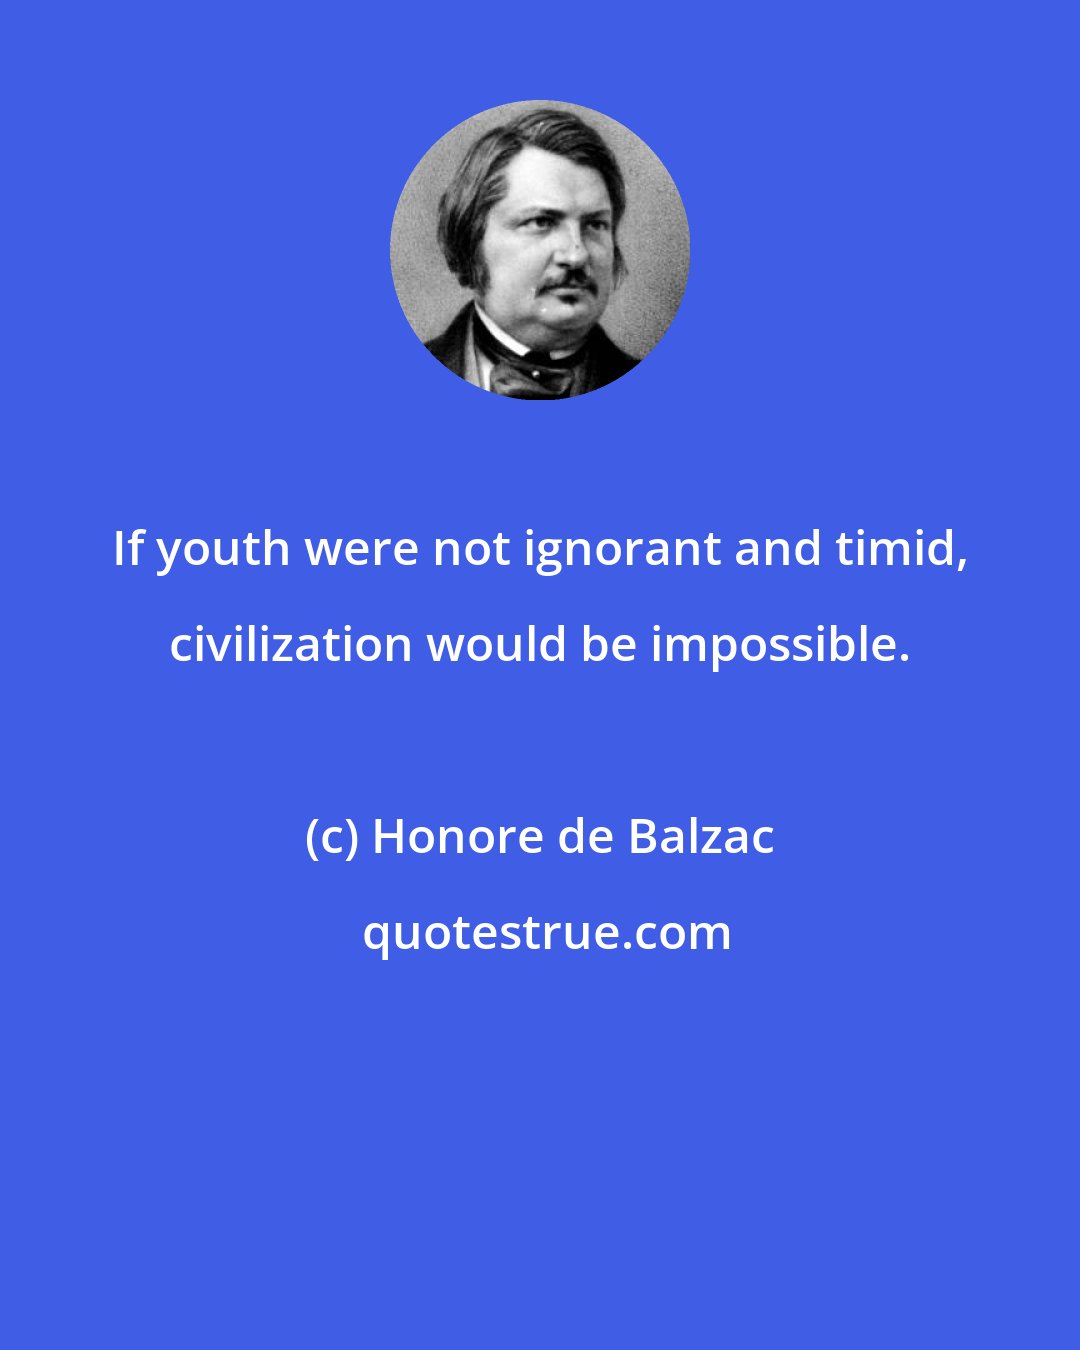 Honore de Balzac: If youth were not ignorant and timid, civilization would be impossible.